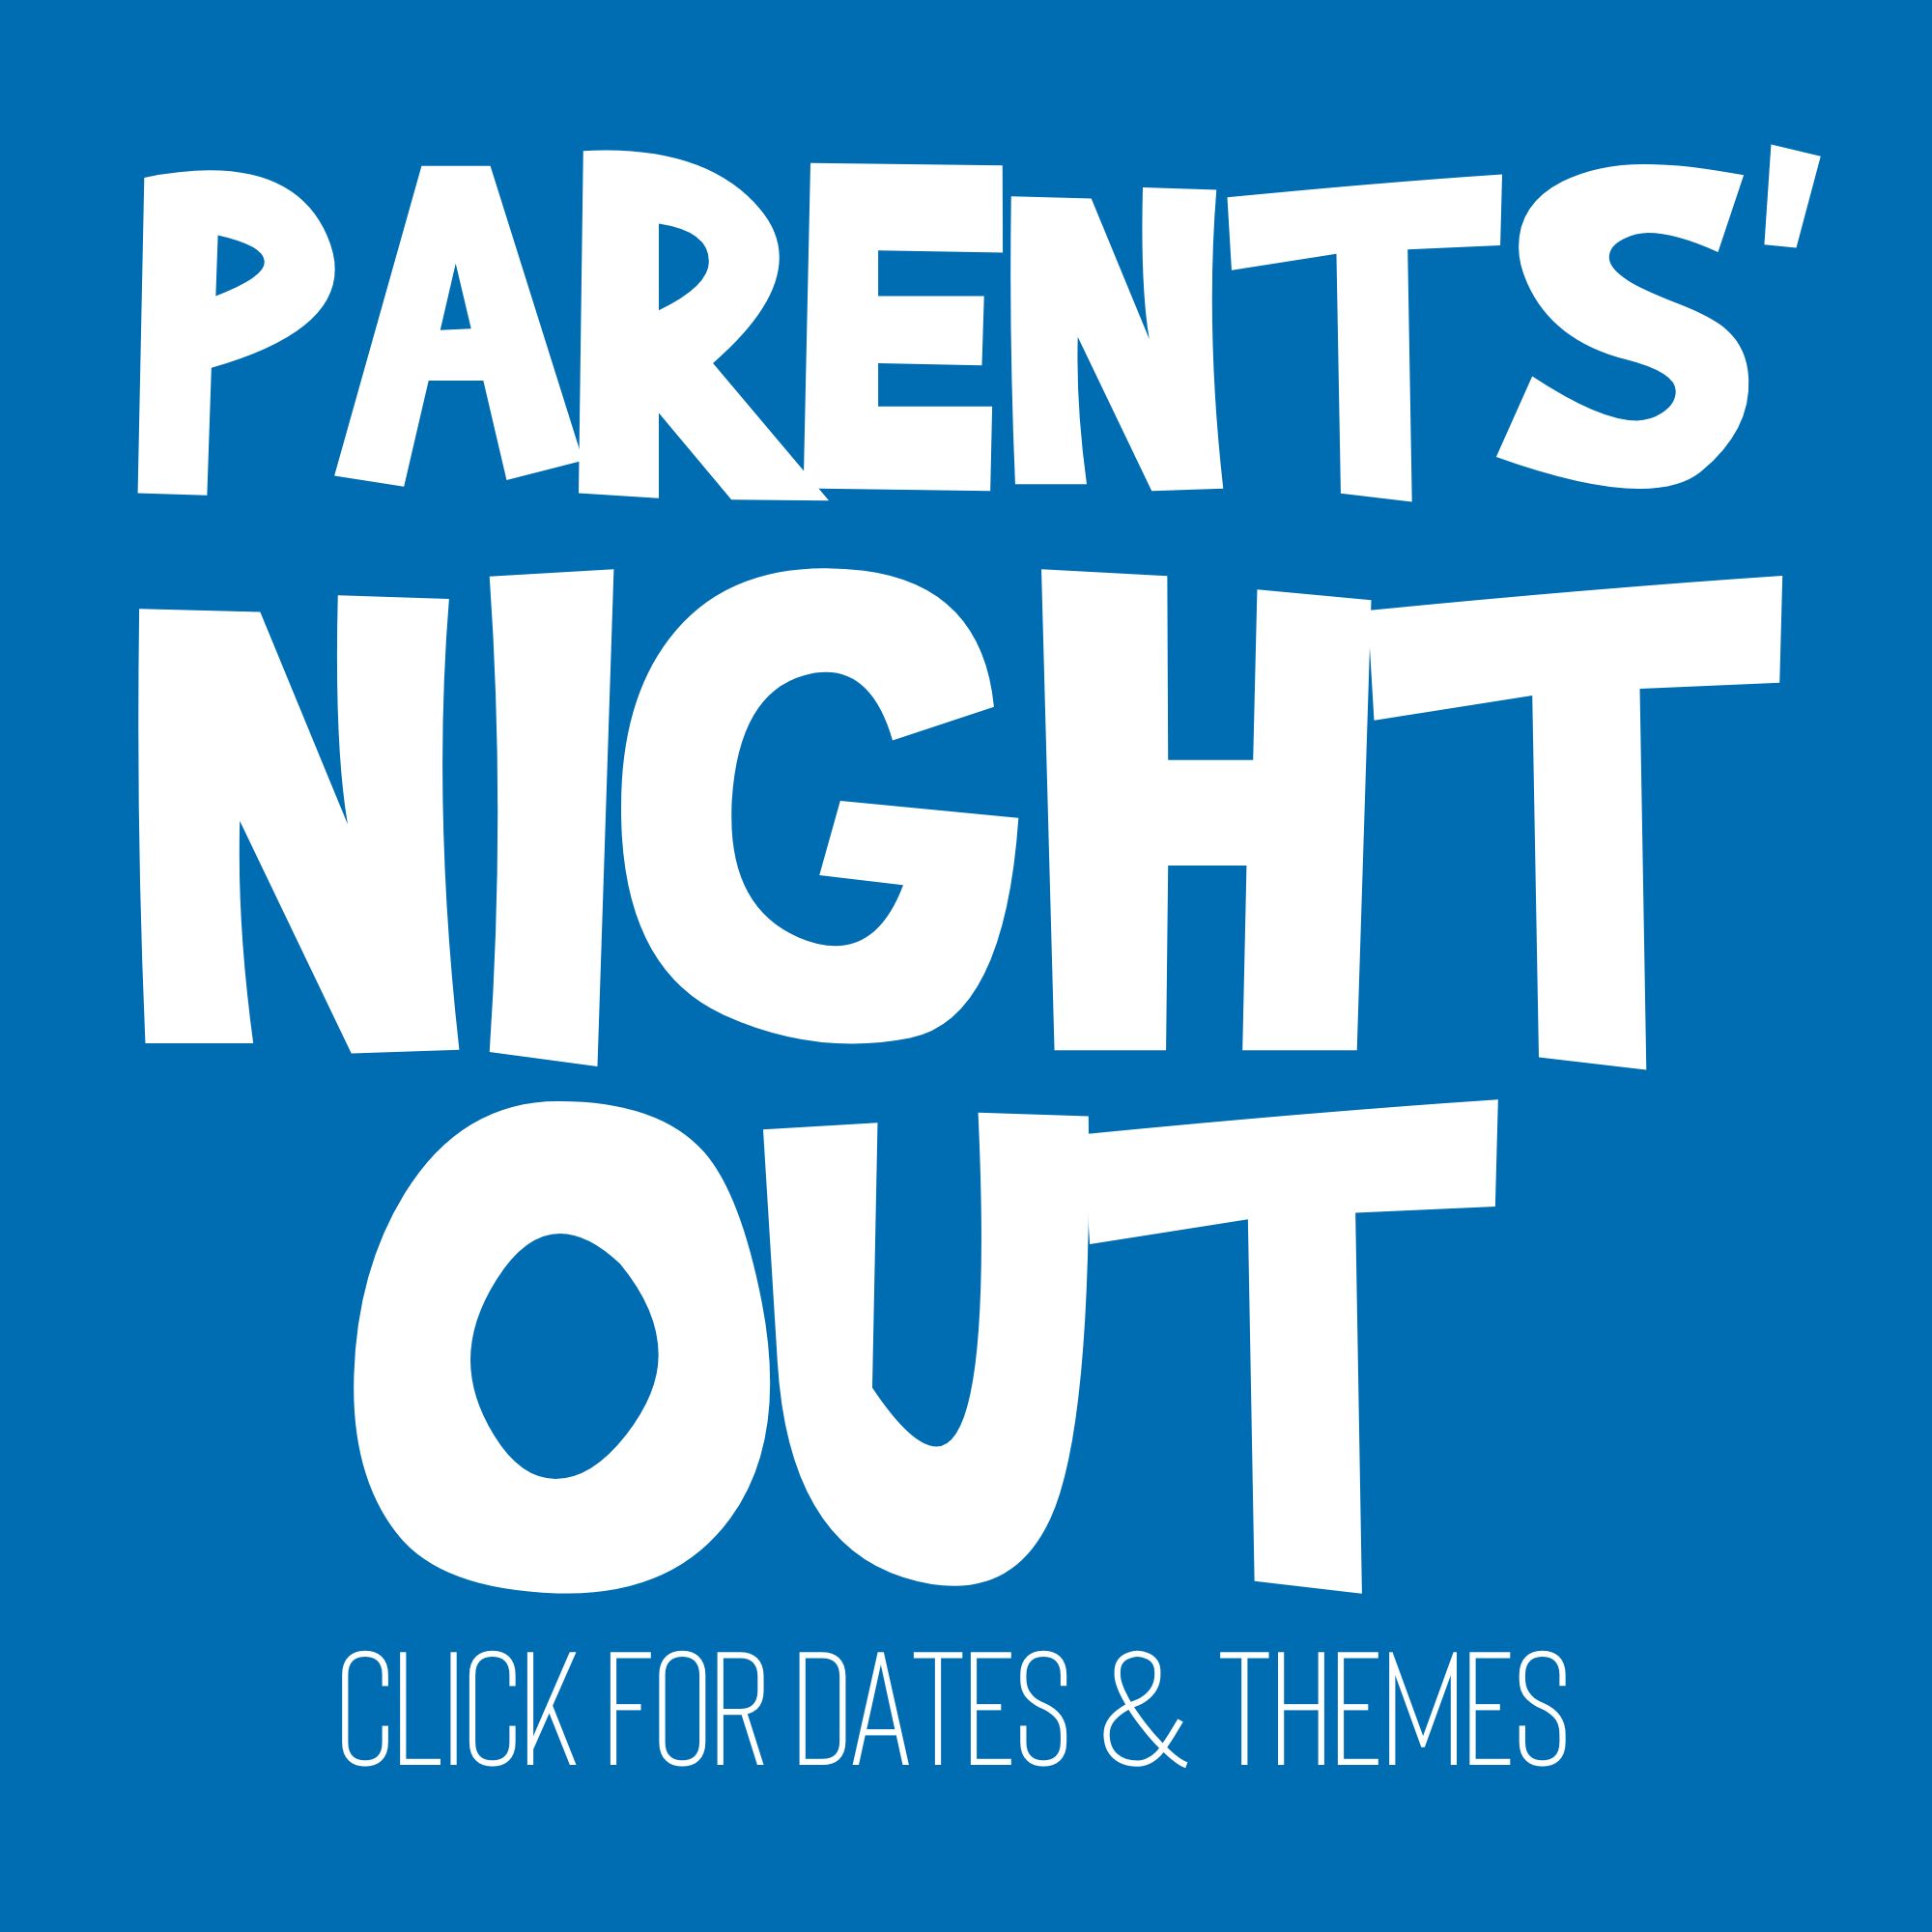 Parent's Night Out